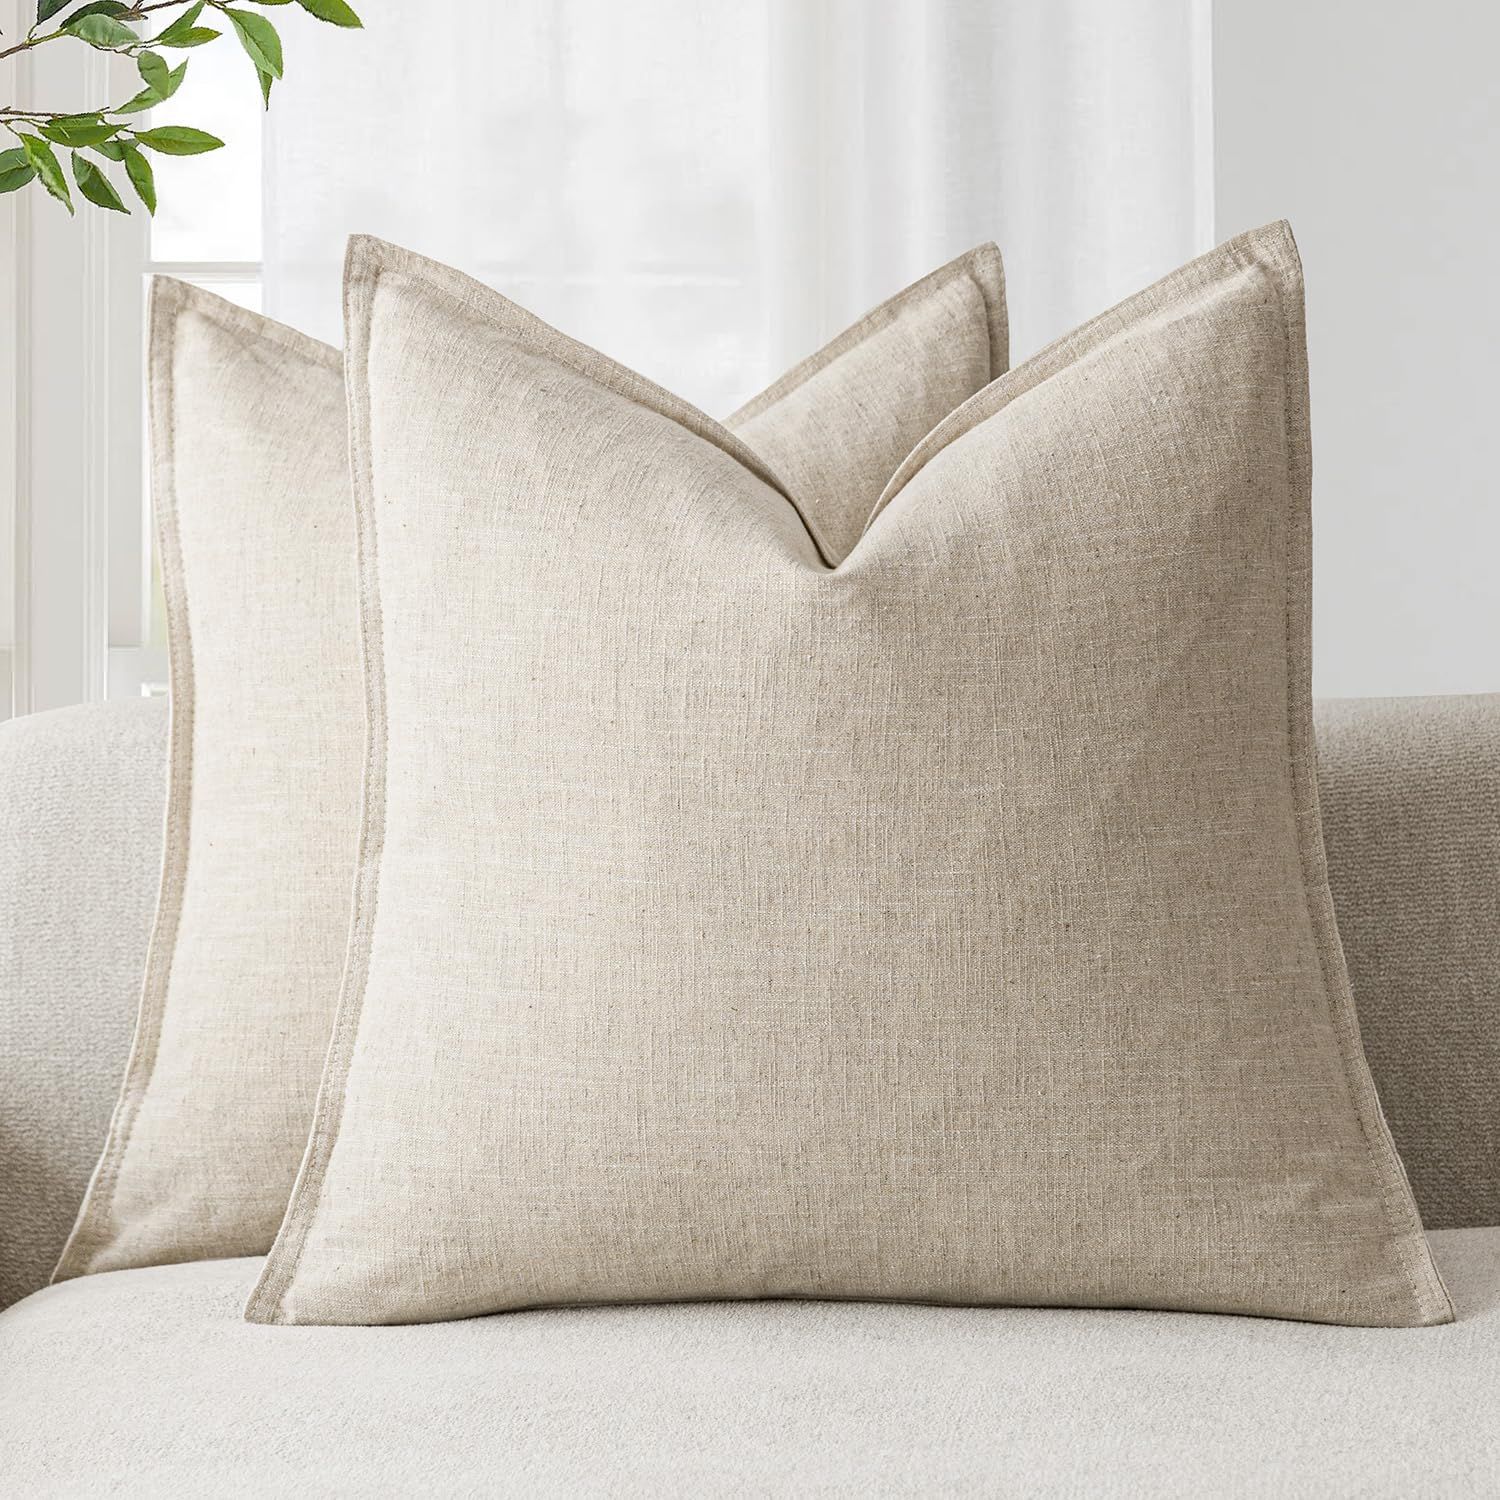 Foindtower Pack of 2, Decorative Linen Soild Throw Pillow Covers Soft Accent Cushion Case Boho Farmhouse Neutral Pillowcase for Couch Sofa Bedroom Living Room Home Decor 20 x 20 Inch Natural Beige | Amazon (US)